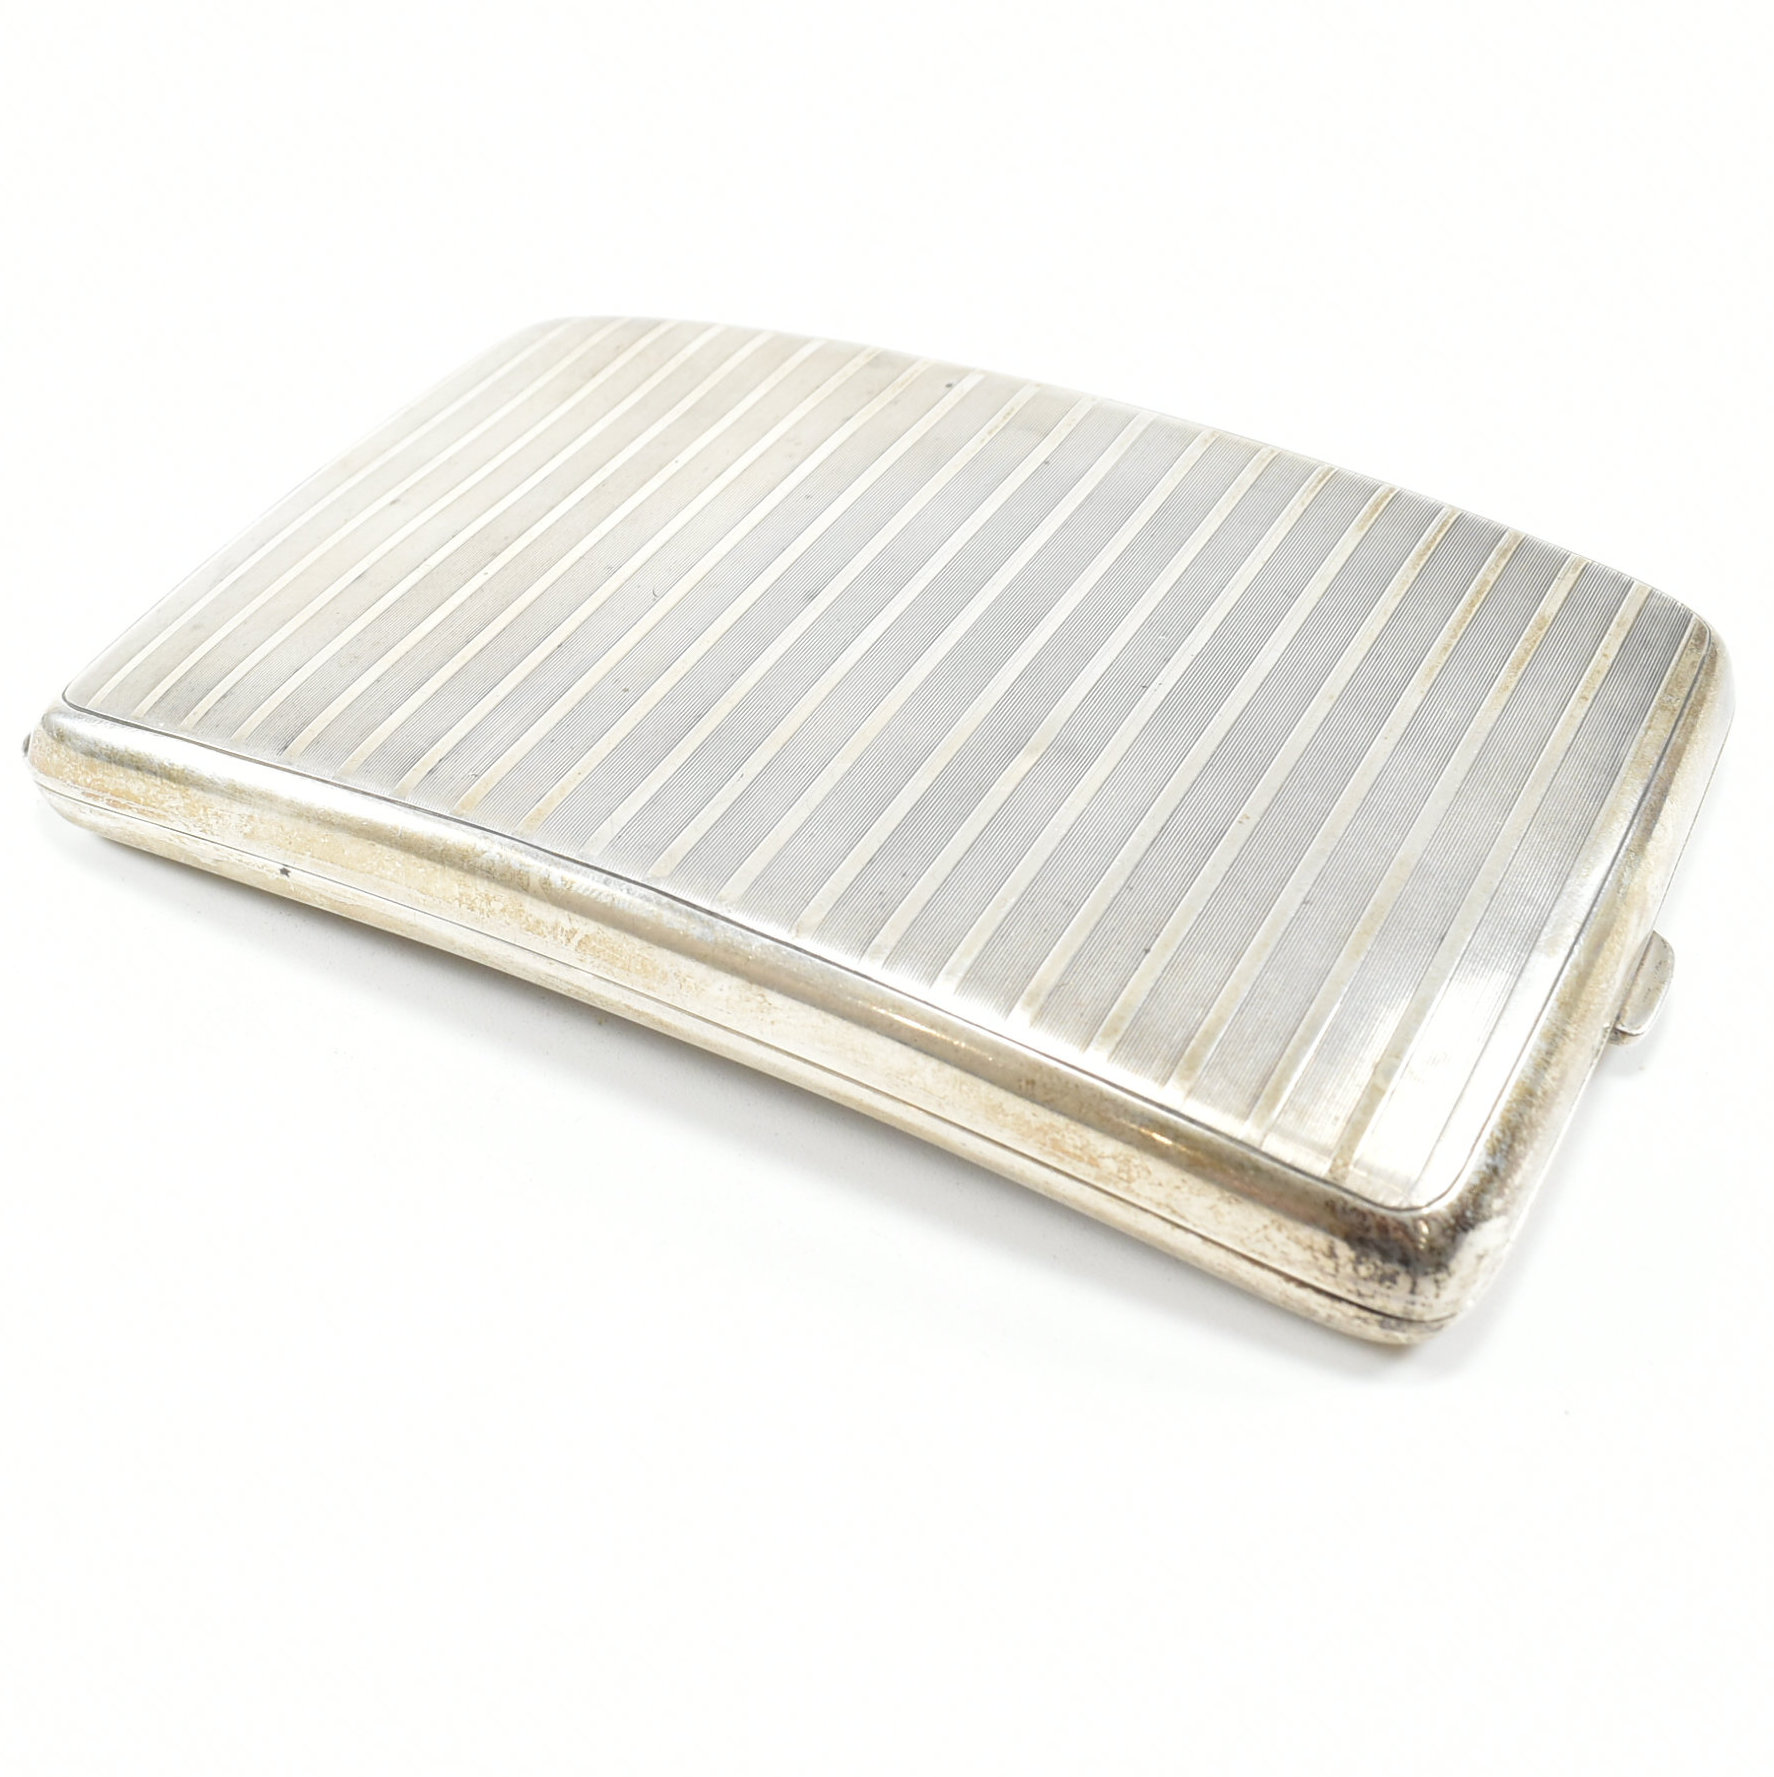 EARLY 20TH CENTURY HALLMARKED SILVER MAPPIN & WEBB CIGARETTE CASE - Image 2 of 8